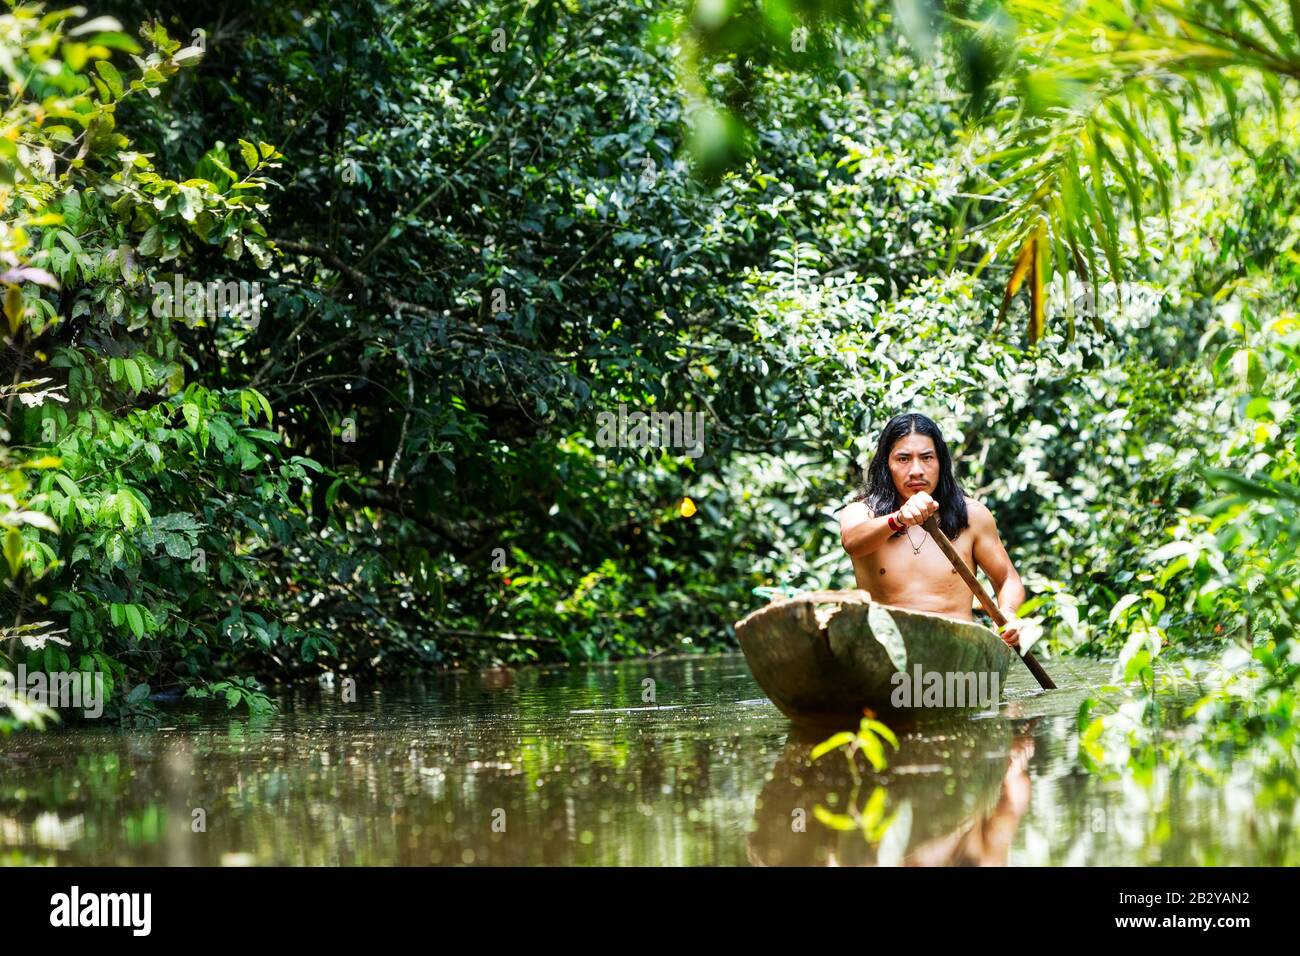 Native Adult Man On Symbolic Wooden Boat Sliced From A Single Timber Navigating Murky Waters Of Ecuadorian Amazonian Primary Jungle Stock Photo